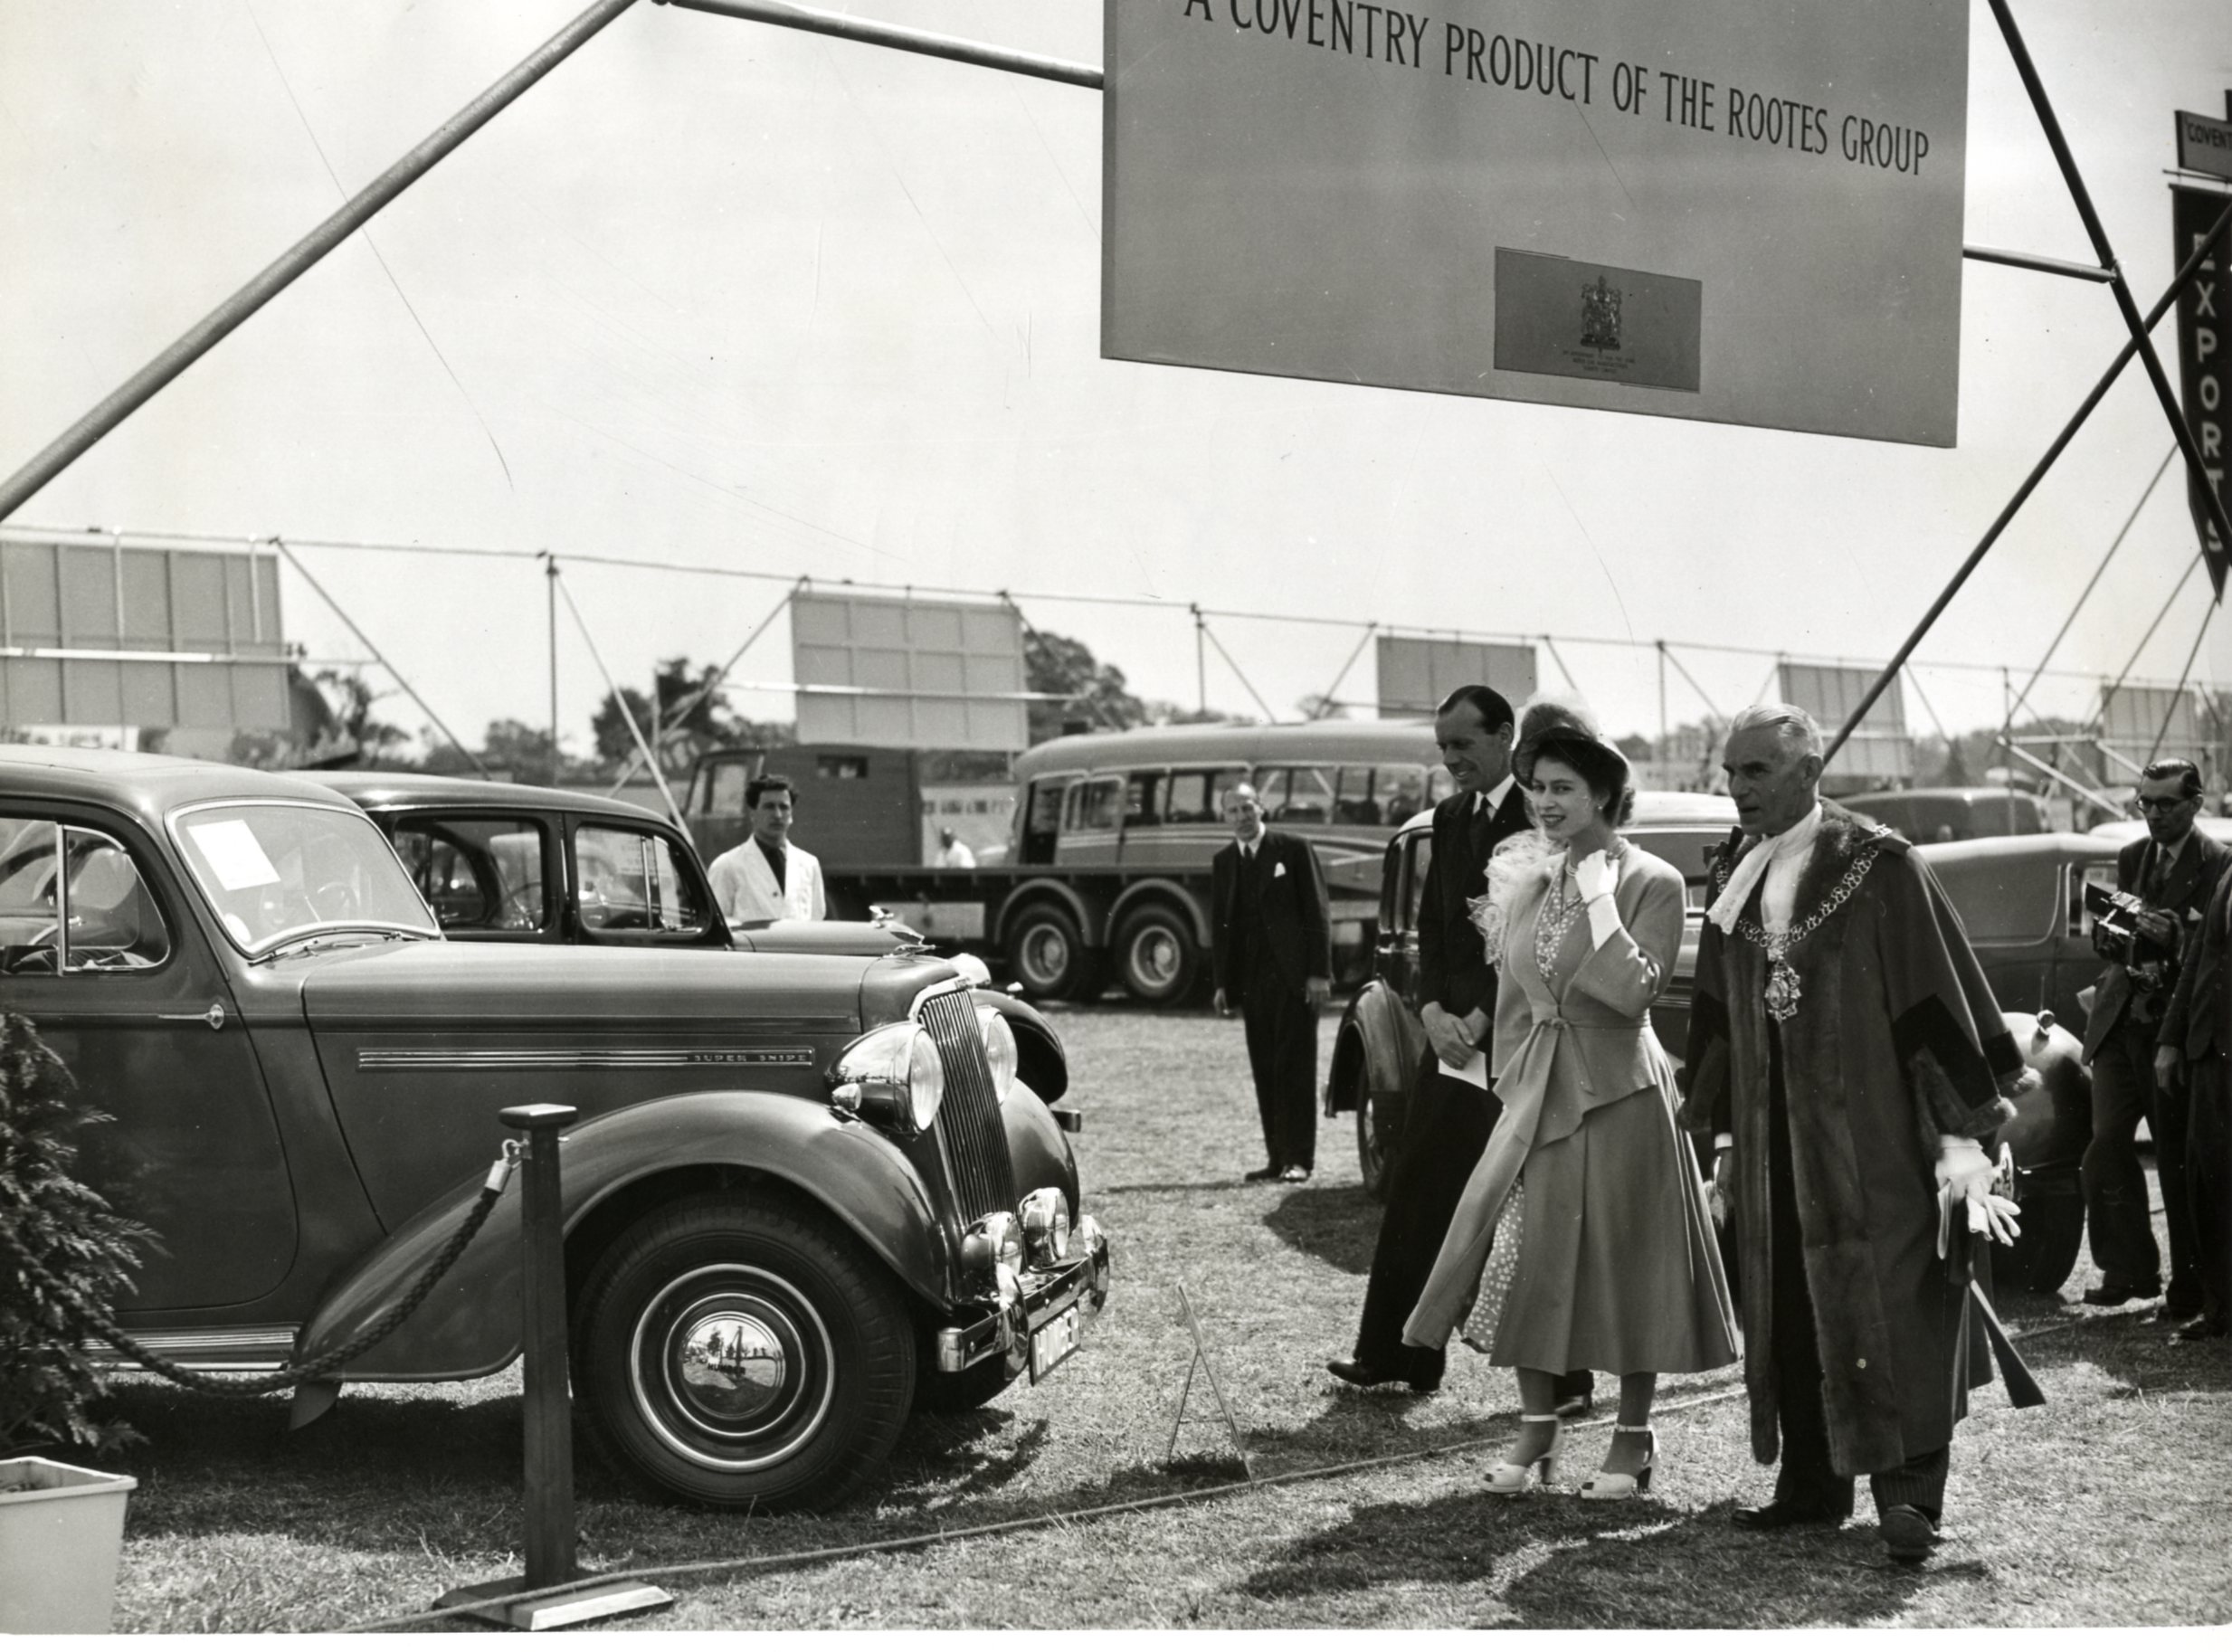 Princess Elizabeth looking at a Humber Super Snipe on display as part of the Rootes Group exhibit in Coventry's War Memorial Park in 1948